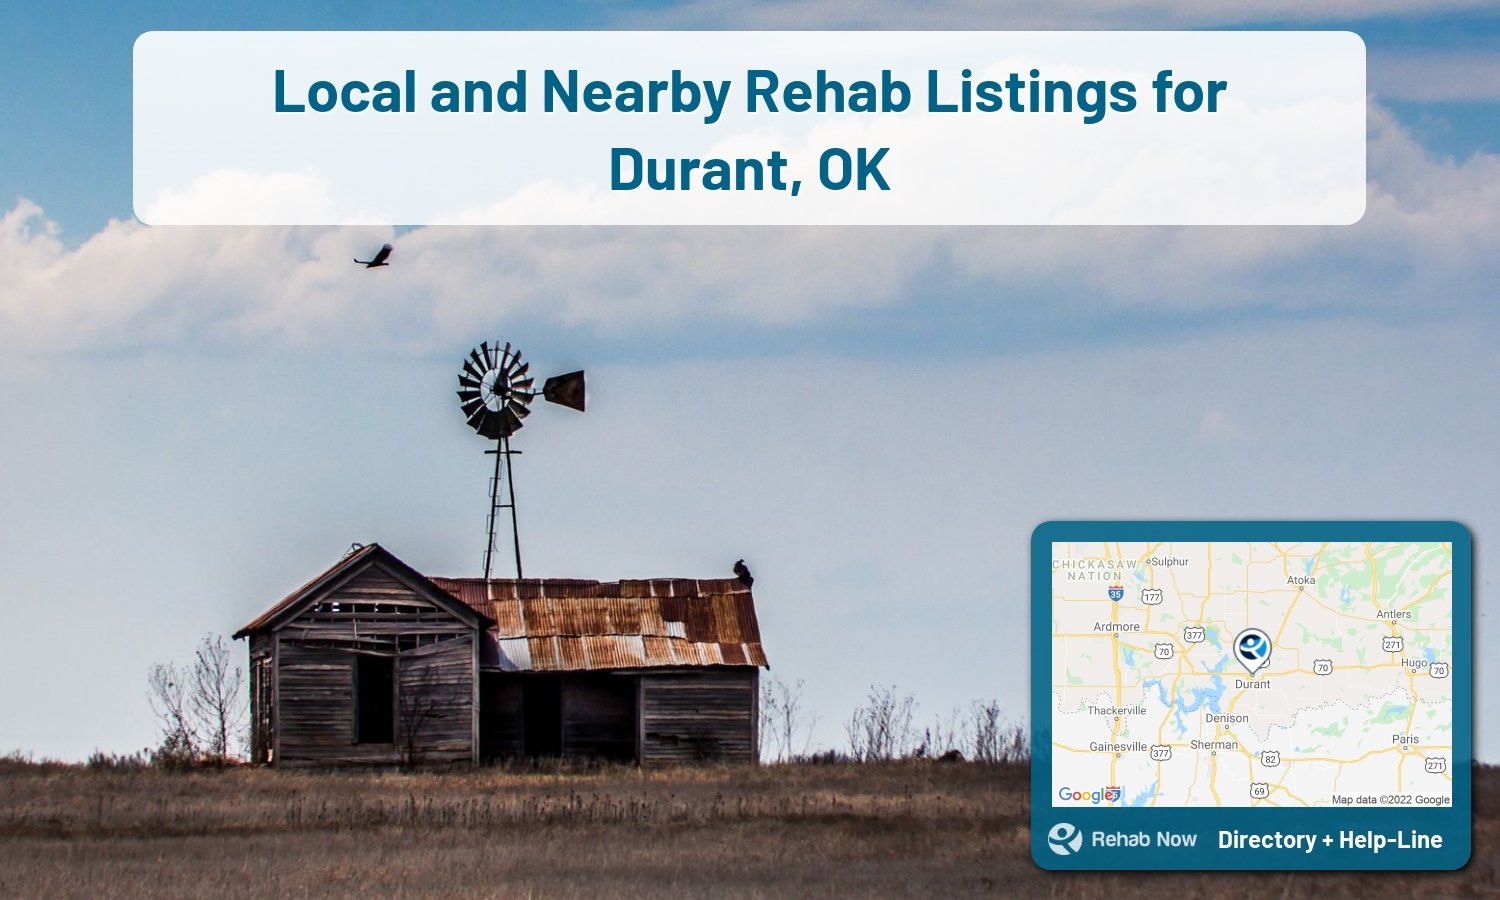 View options, availability, treatment methods, and more, for drug rehab and alcohol treatment in Durant, Oklahoma